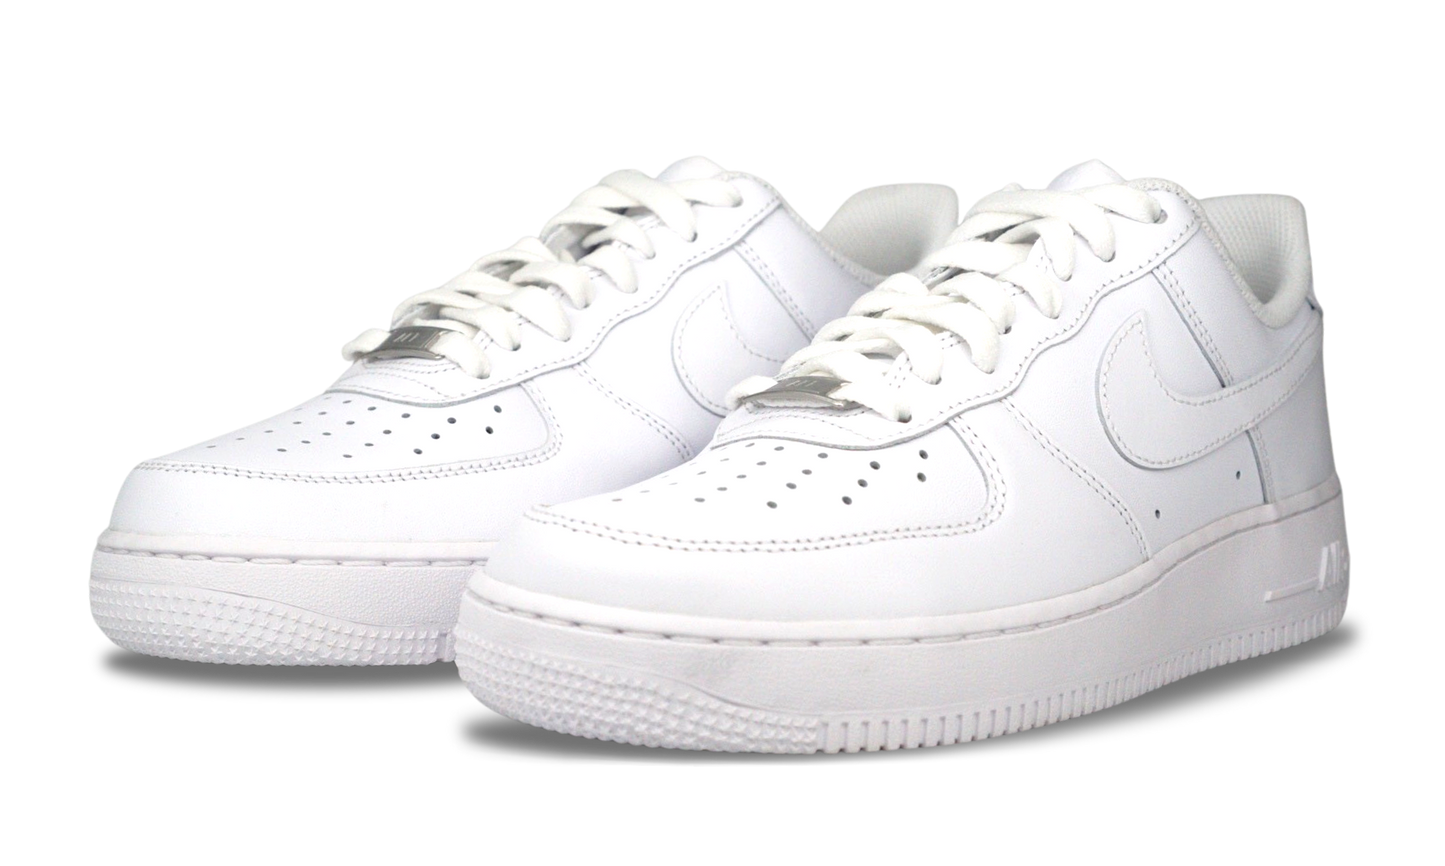 Nike Air Force 1 Low ‘07 White (Women’s)